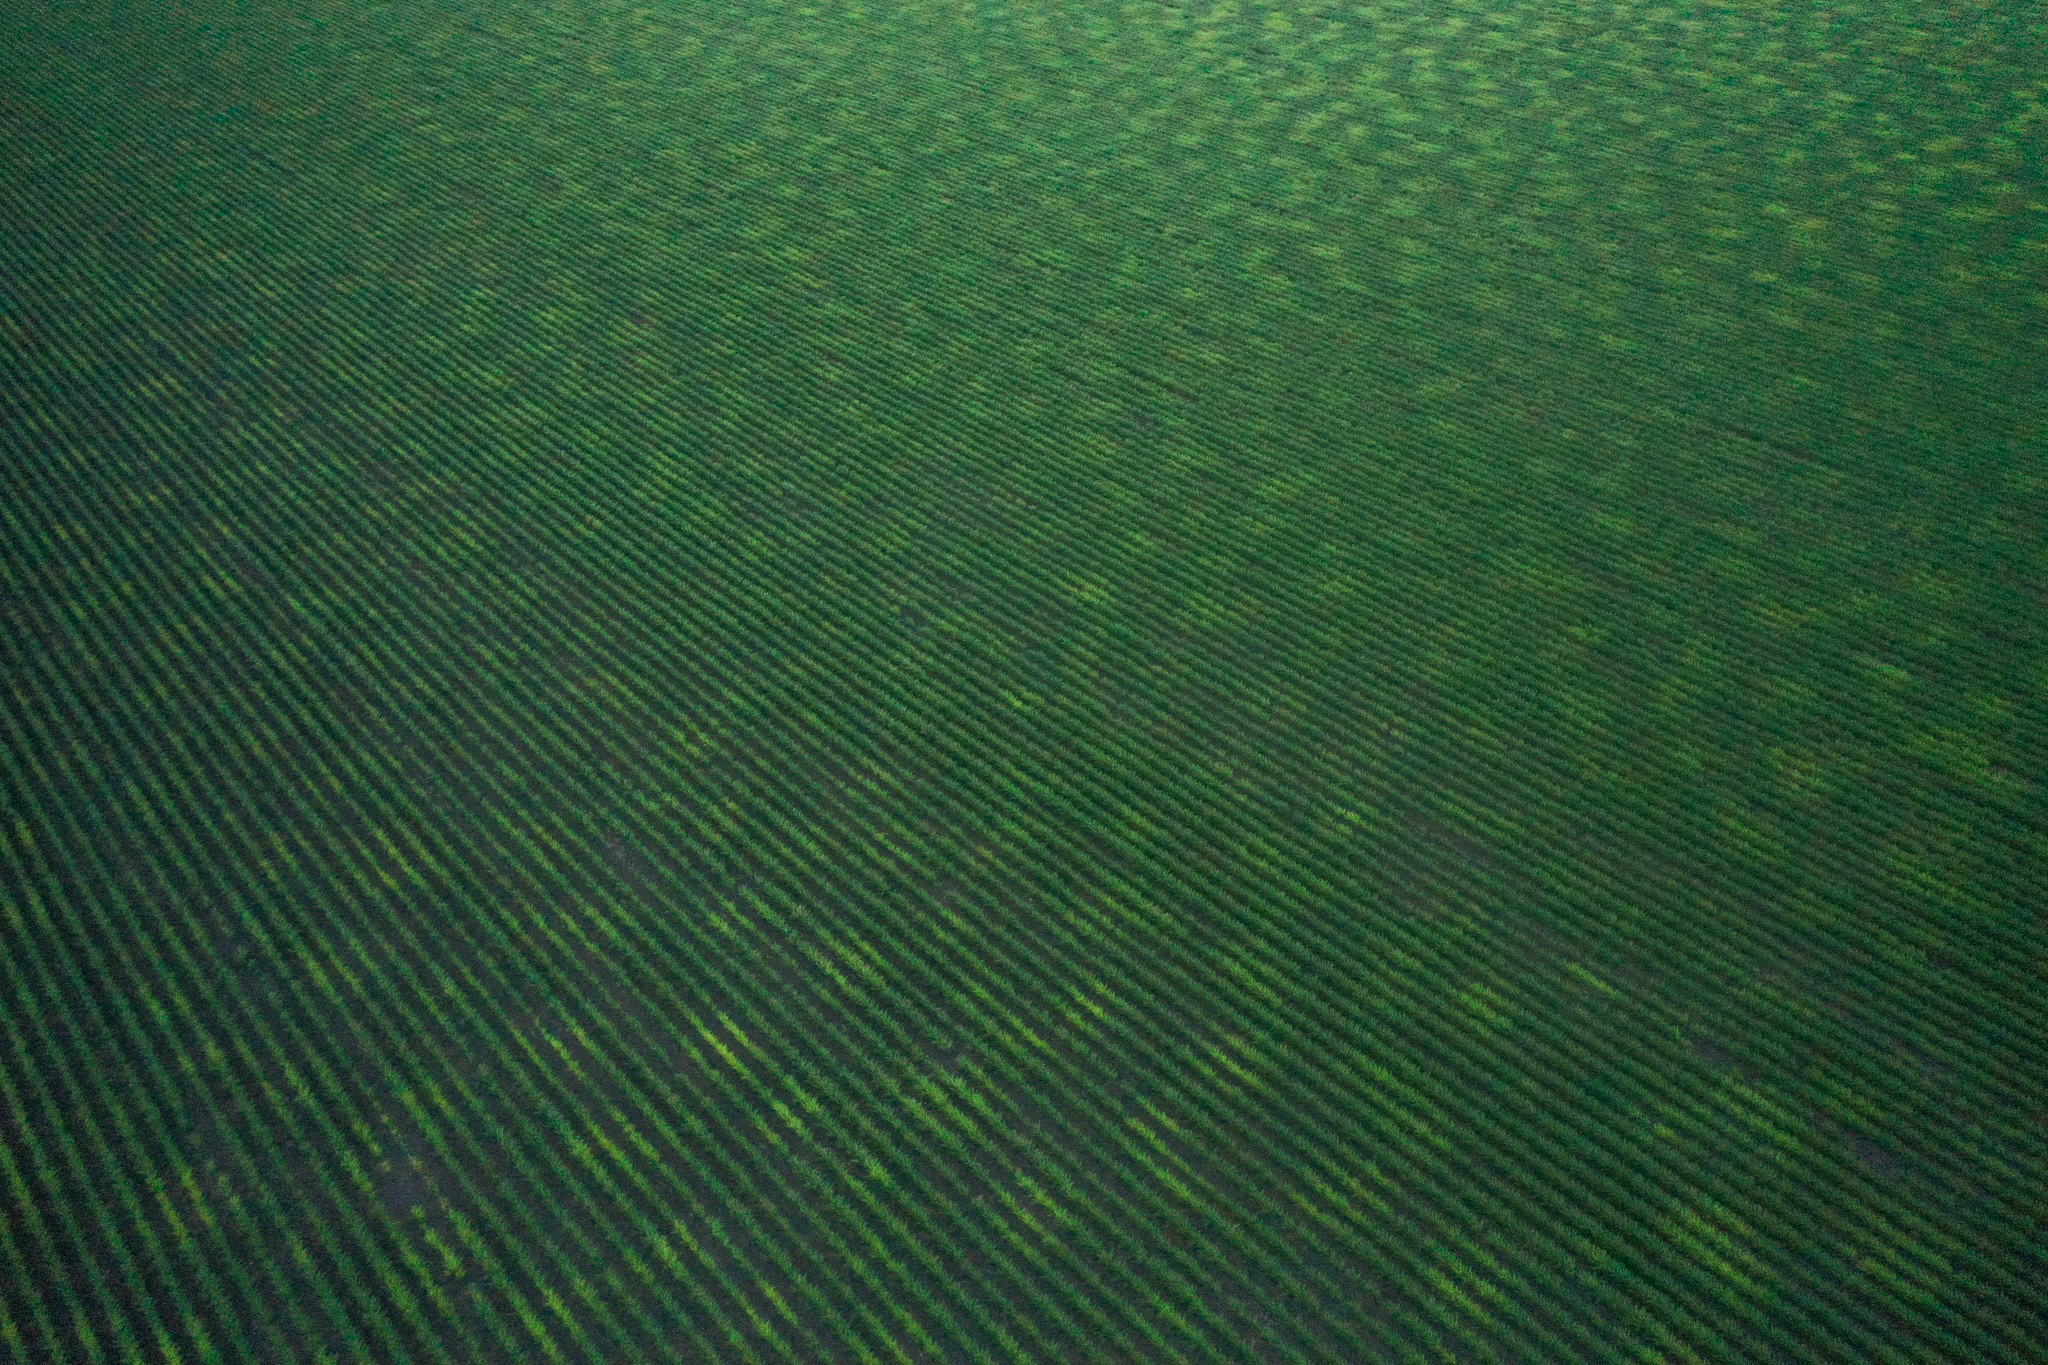 Aerial textures of young sorghum plants in south Texas